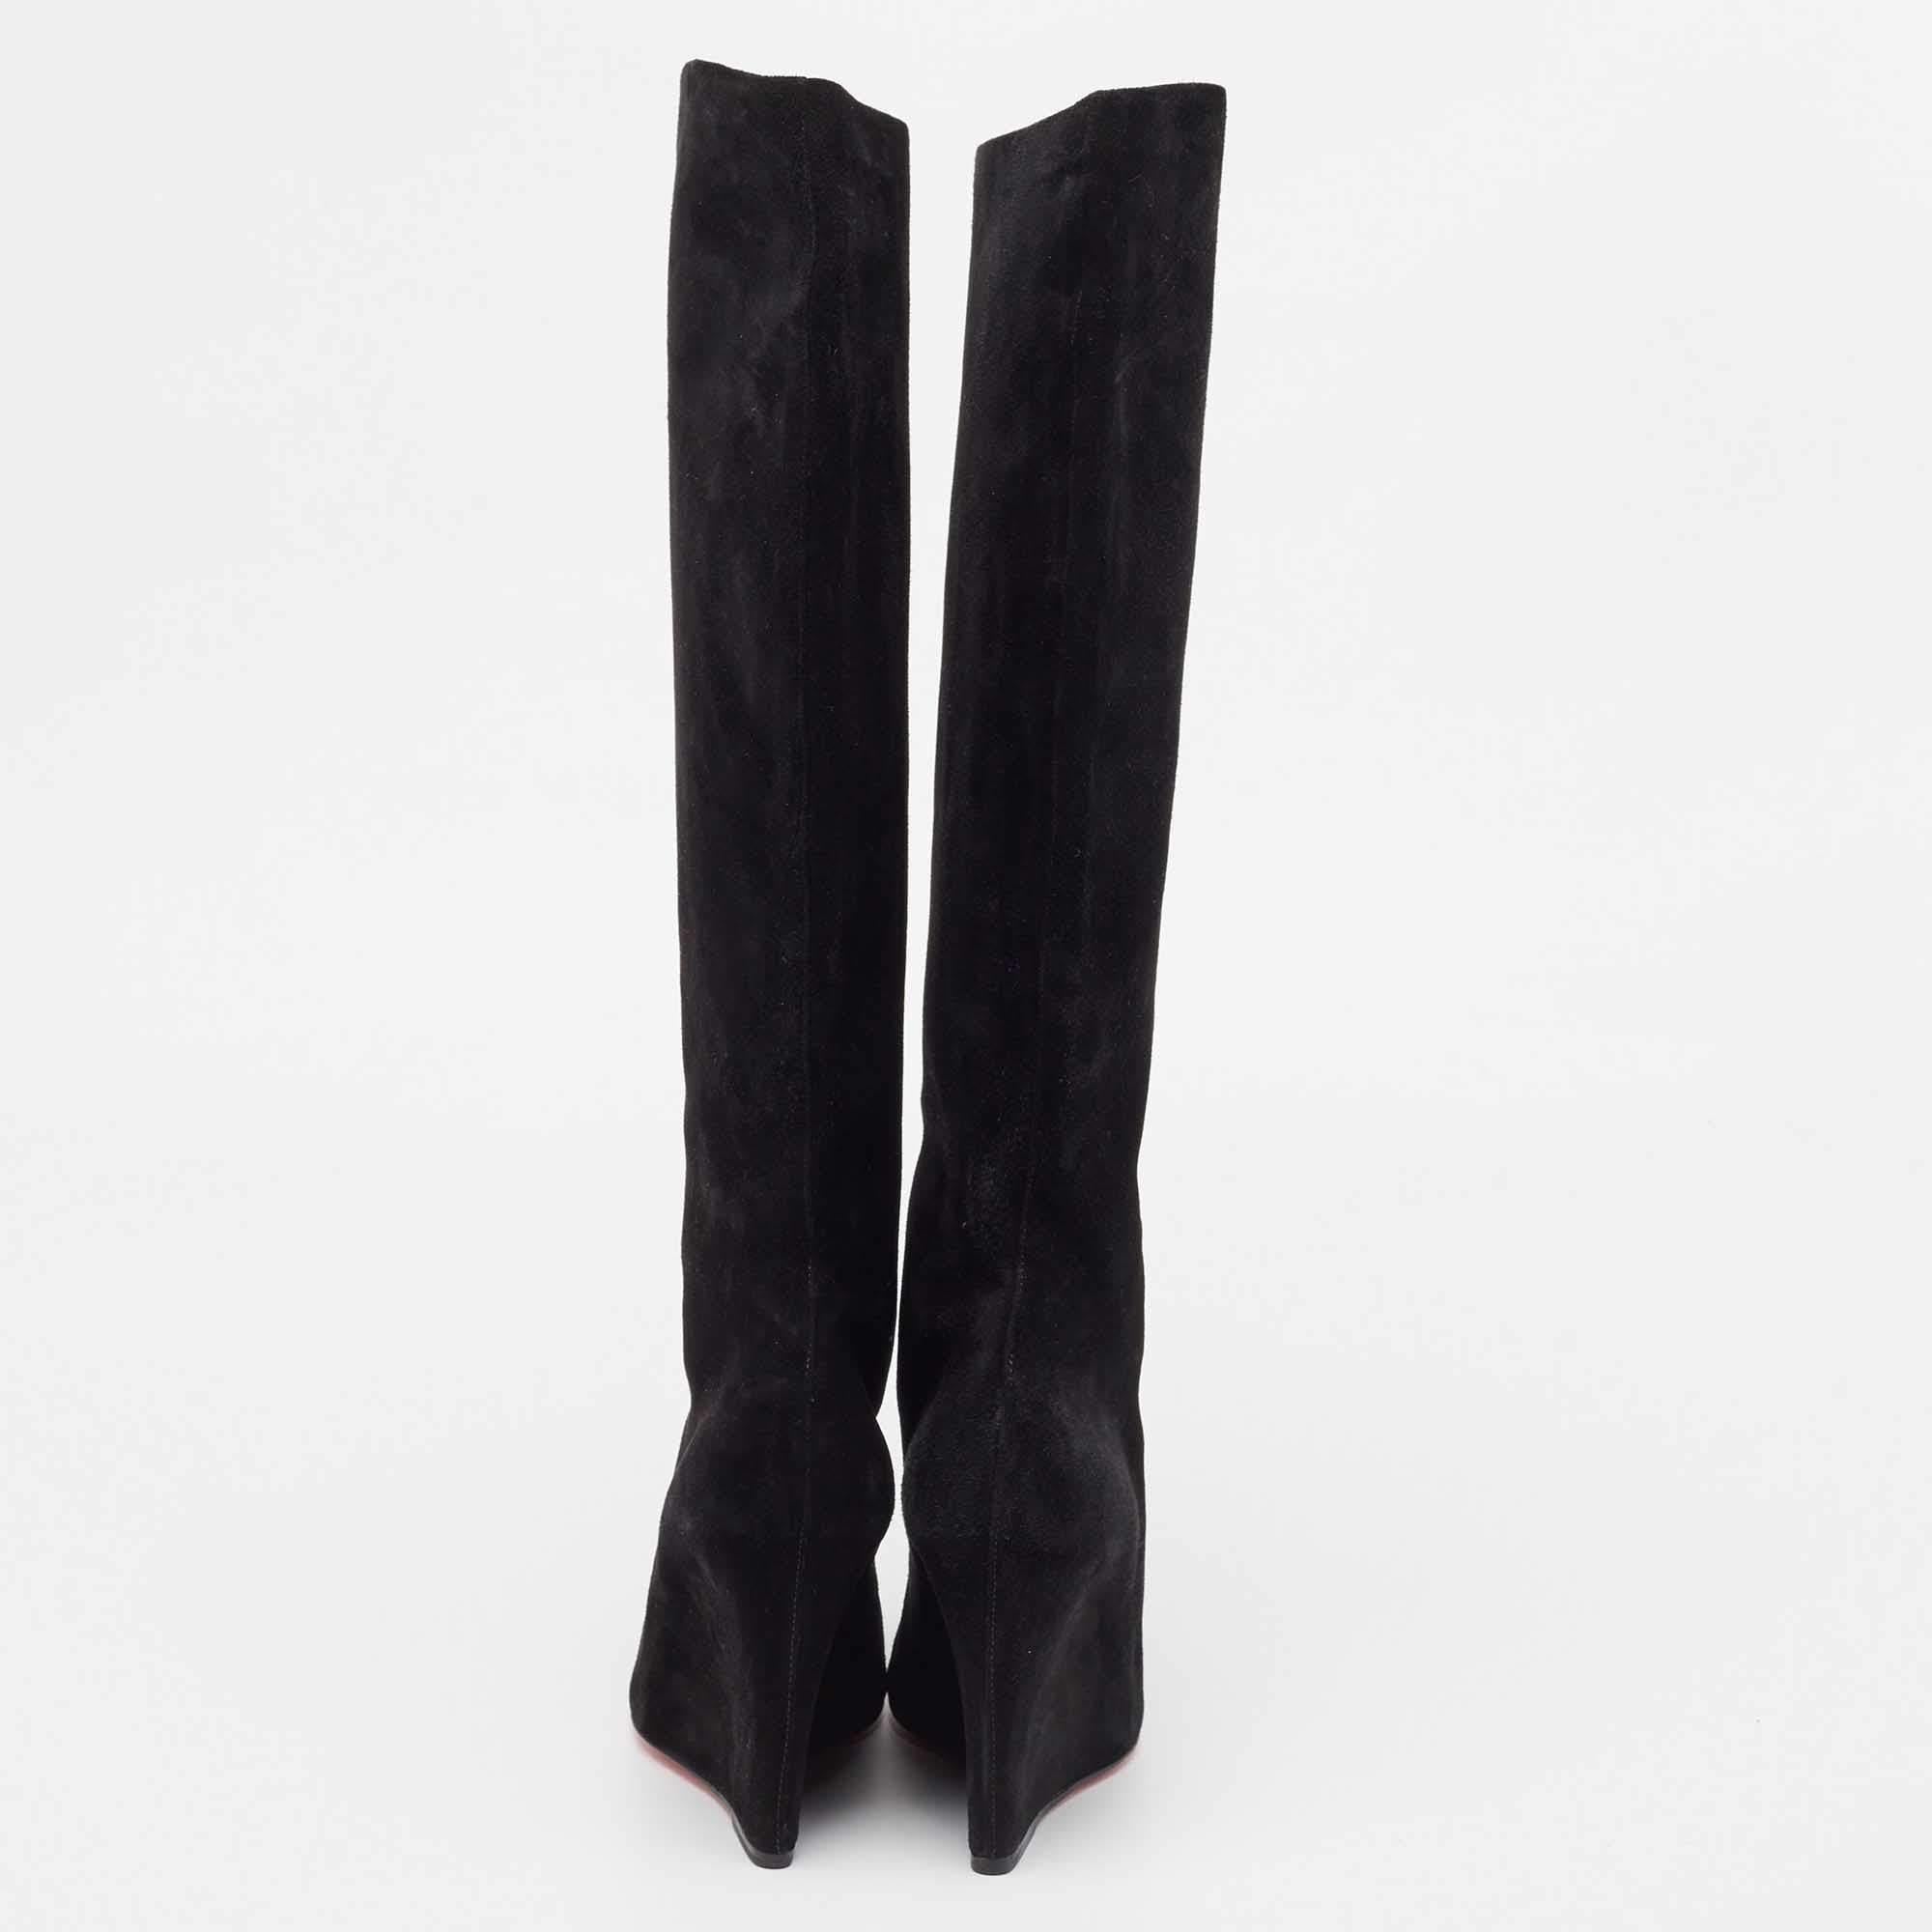 Christian Louboutin Black Suede Melissa Botta Wedge Knee Boots Size 37.5 In Good Condition For Sale In Dubai, Al Qouz 2